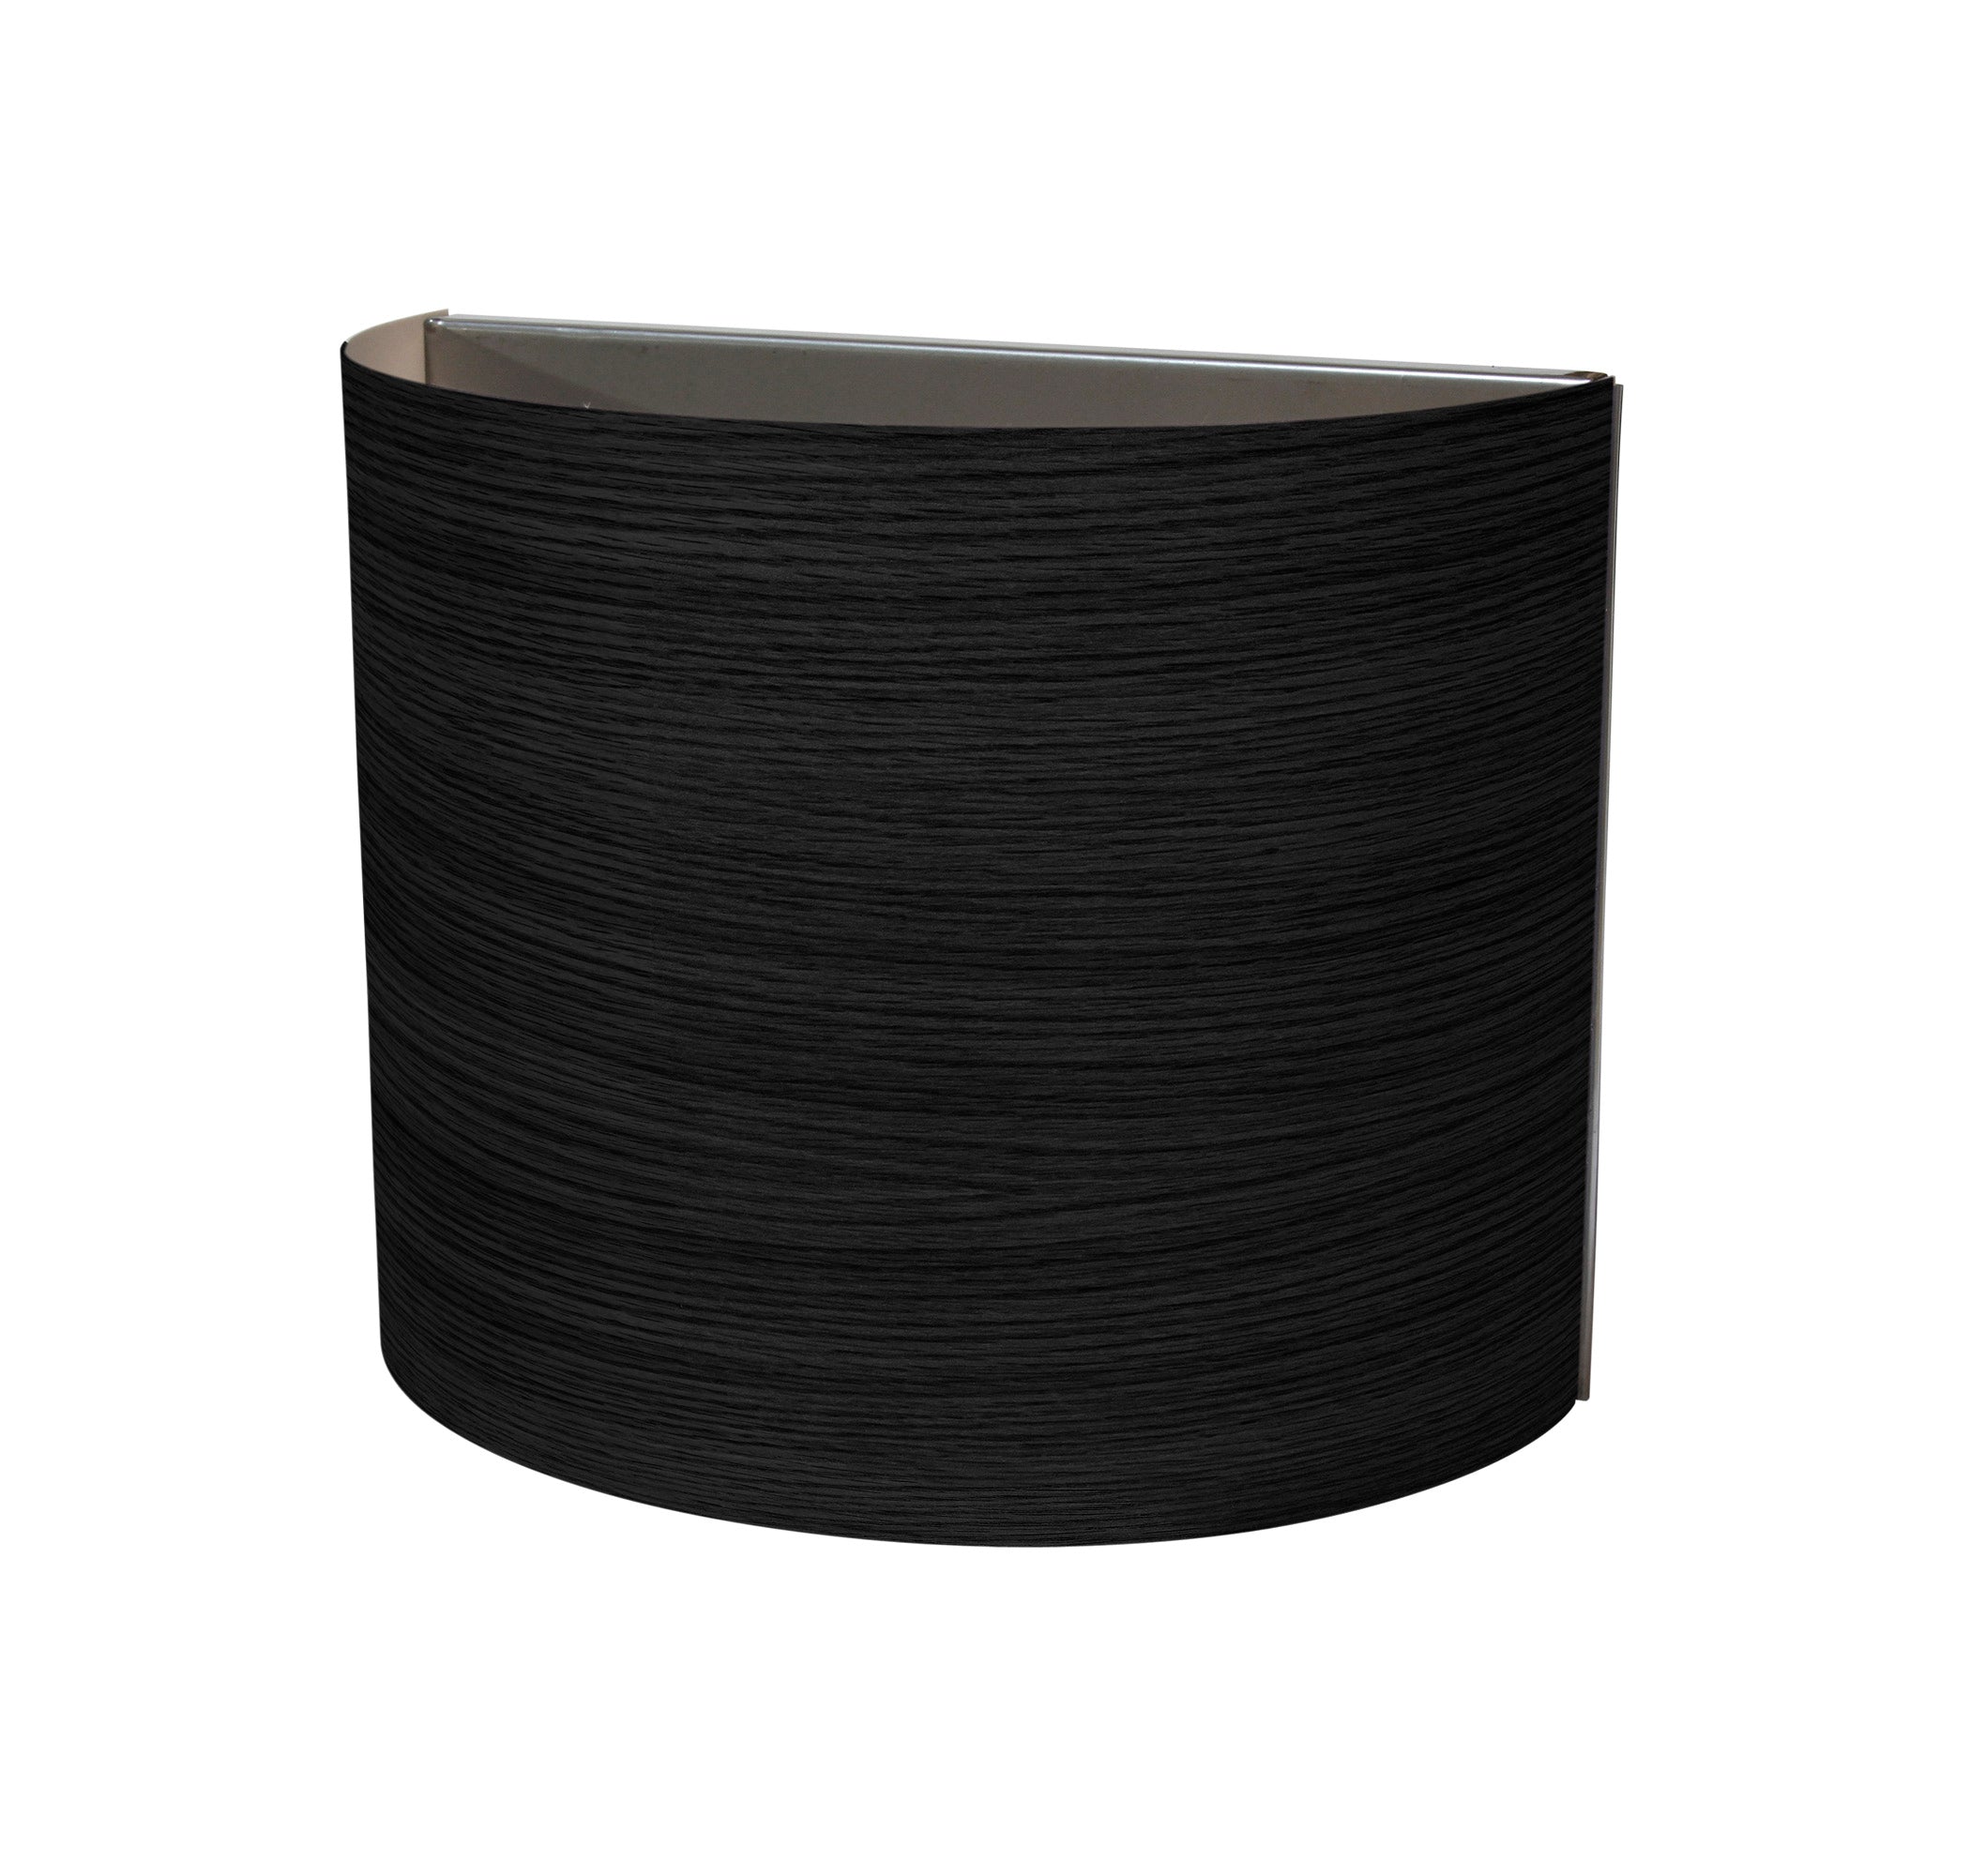 The Vita Wall Sconce from Seascape Fixtures in photo veneer, ebony color.